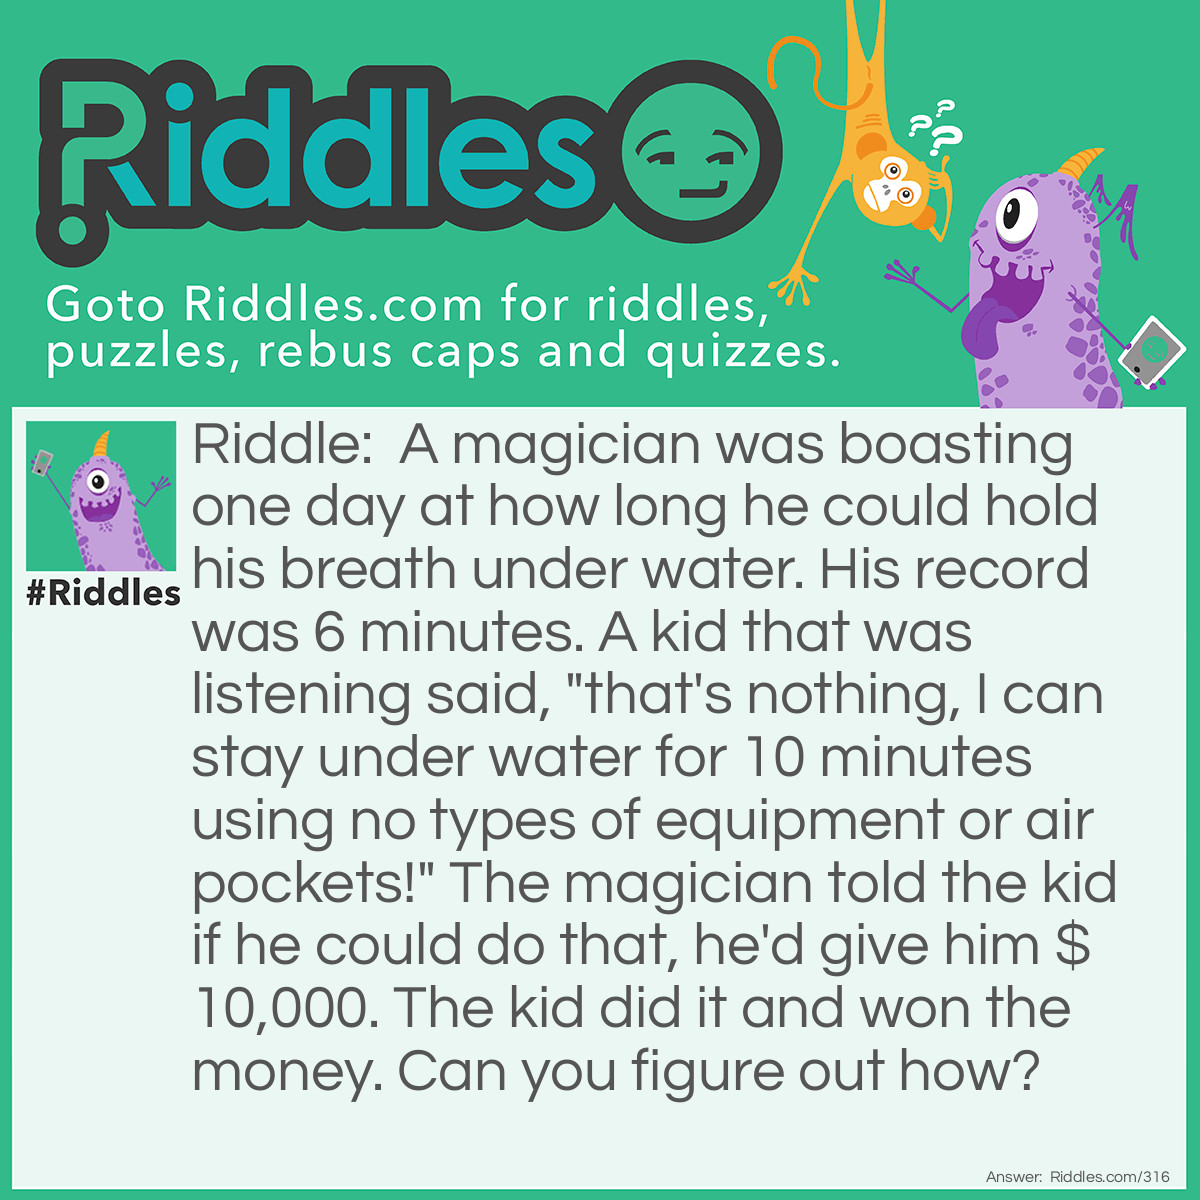 Riddle: A magician was boasting one day at how long he could hold his breath under water. His record was 6 minutes. A kid that was listening said, "that's nothing, I can stay under water for 10 minutes using no types of equipment or air pockets!" The magician told the kid if he could do that, he'd give him $10,000. The kid did it and won the money. Can you figure out how? Answer: The kid filled a glass of water and held it over his head for 10 minutes.